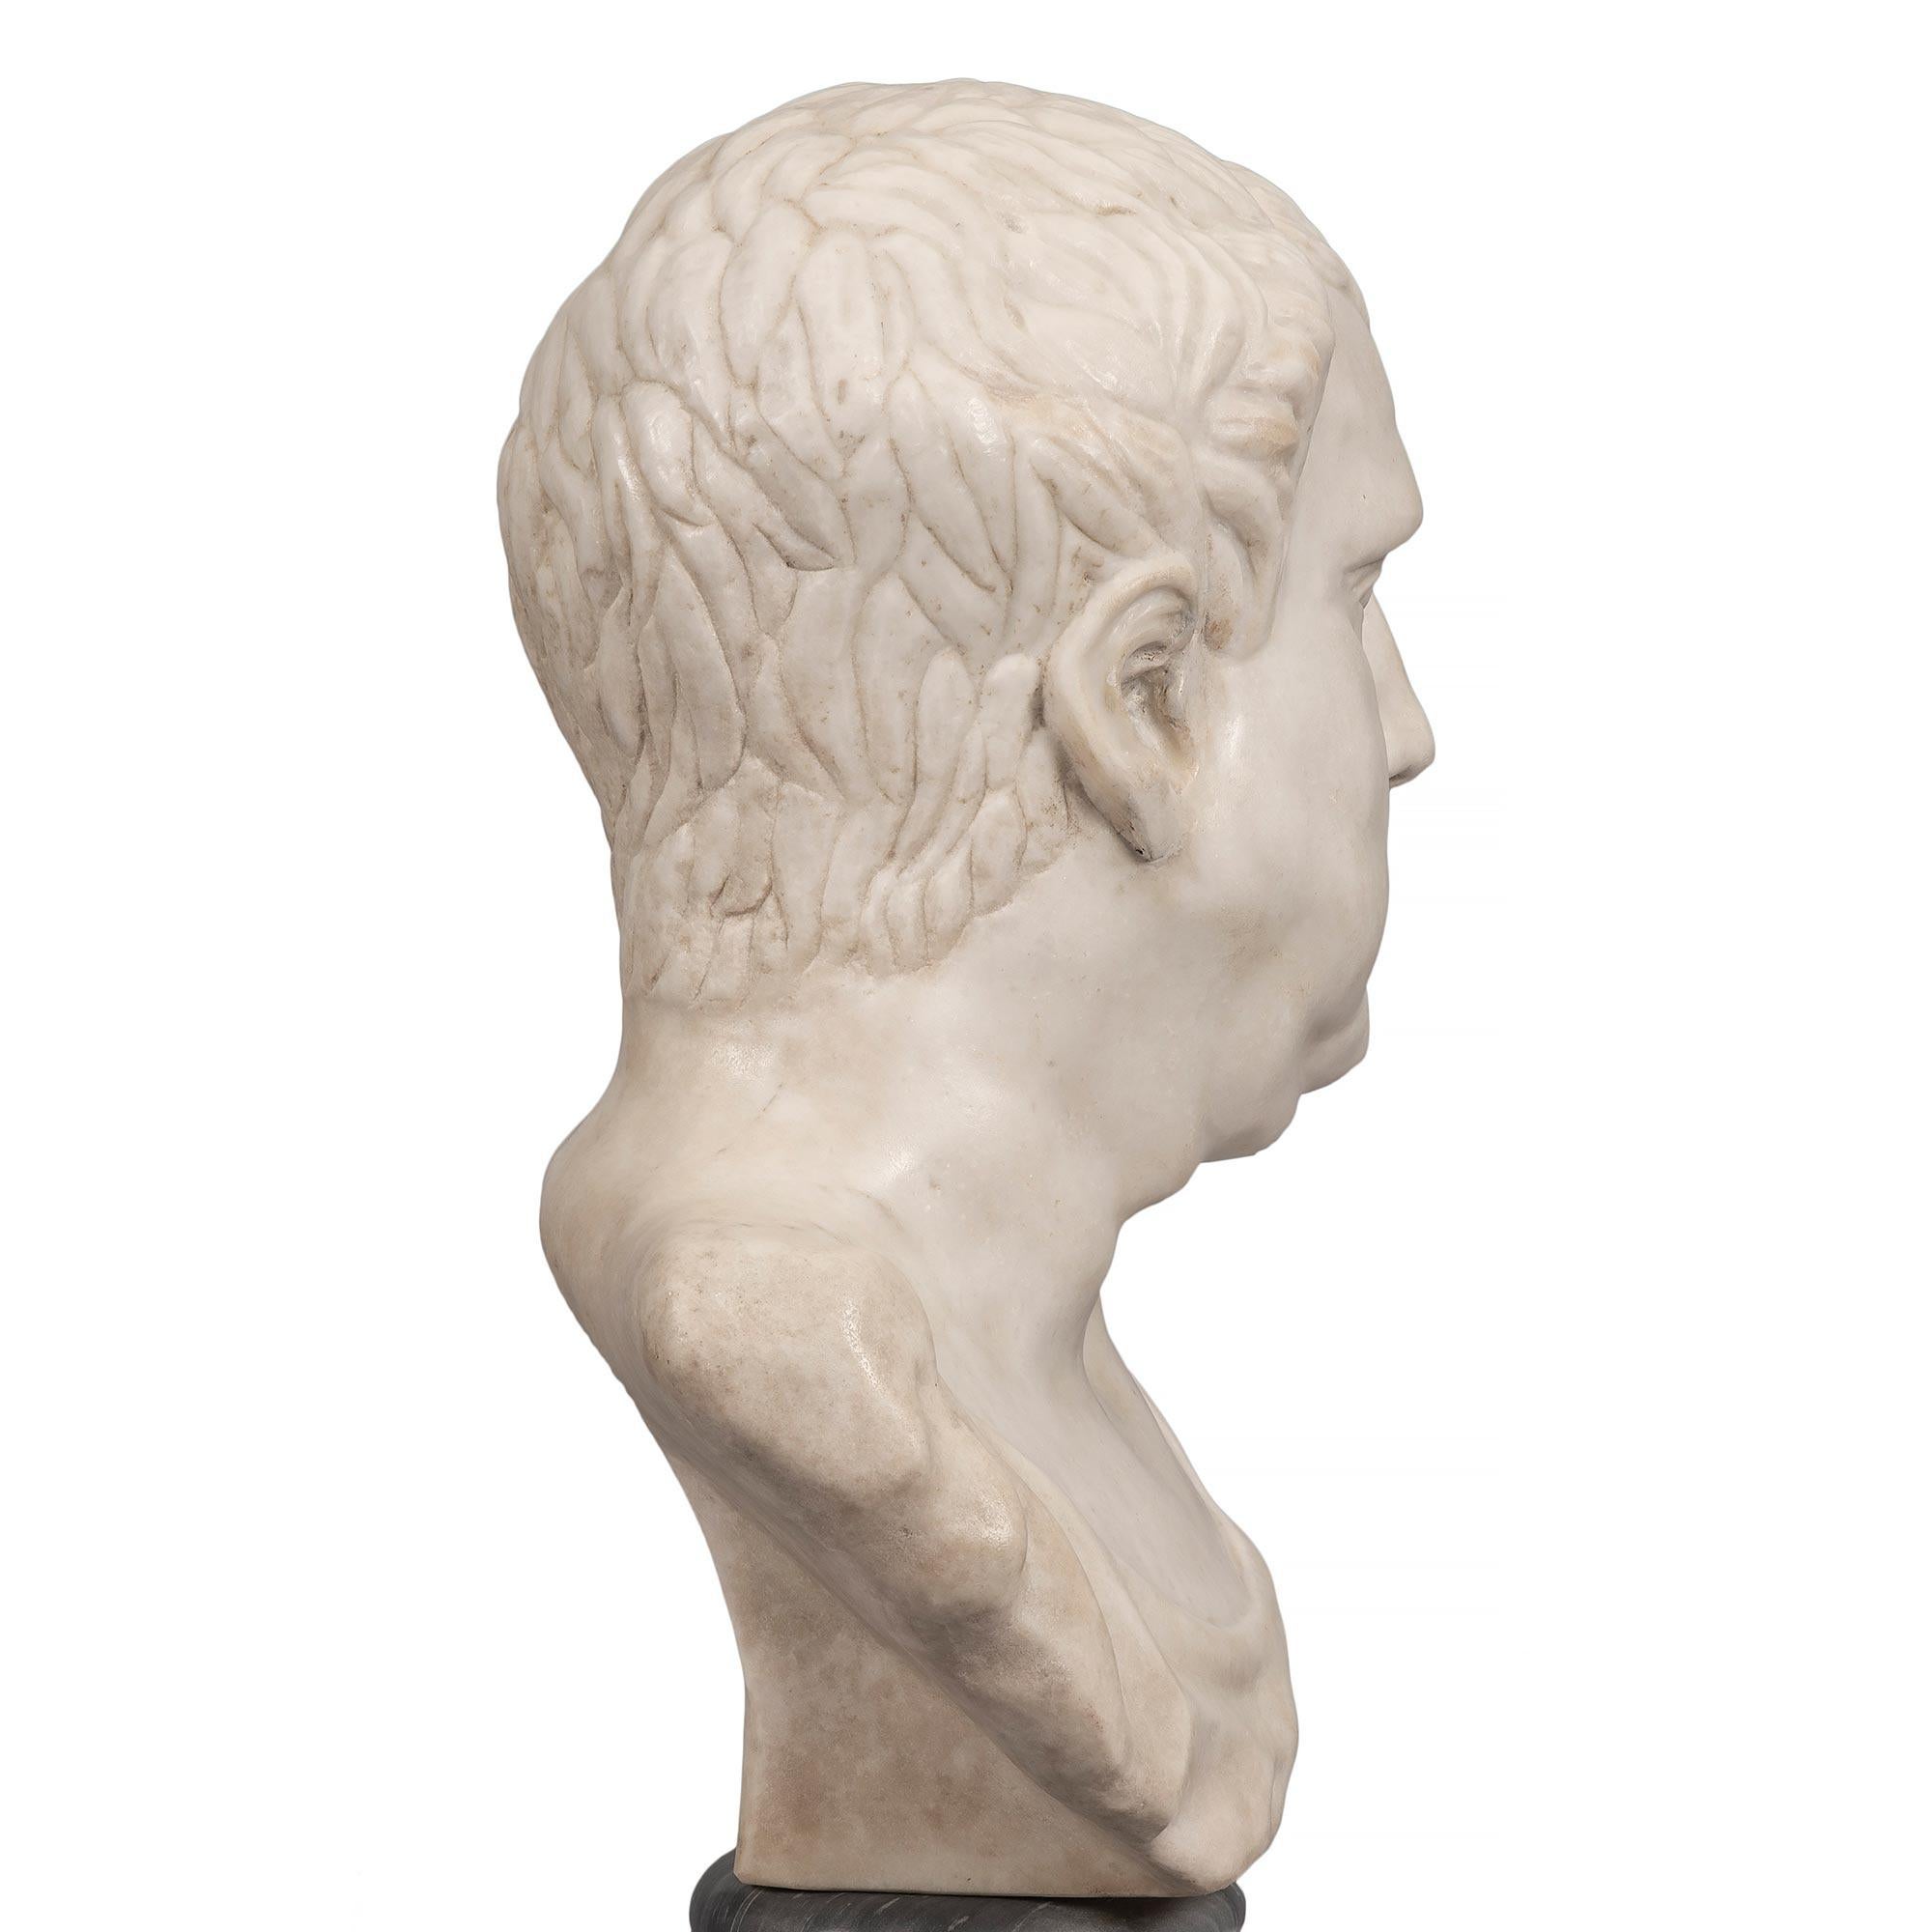 Italian Early 19th Century White Carrara Marble Bust of a Roman Emperor In Good Condition For Sale In West Palm Beach, FL